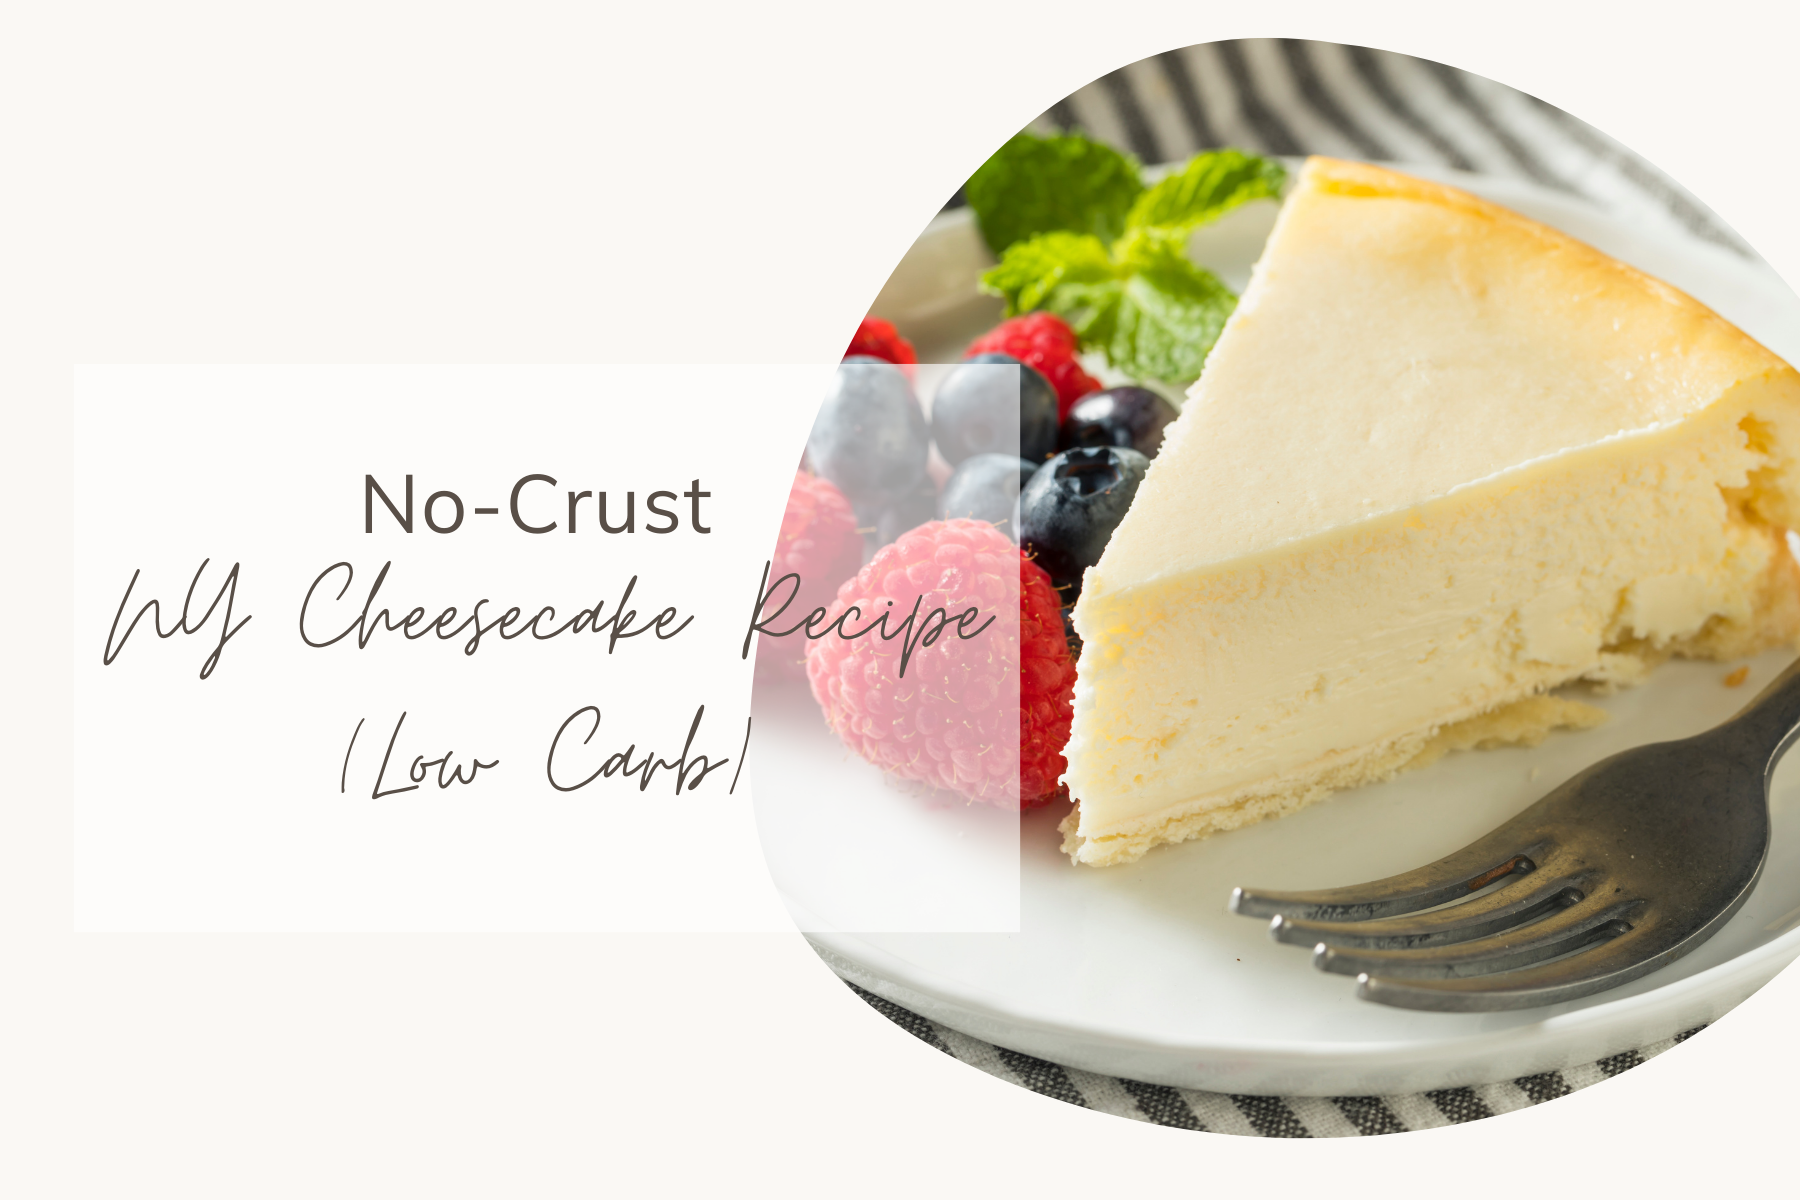 No-Crust NY Cheesecake Recipe (Low Carb)